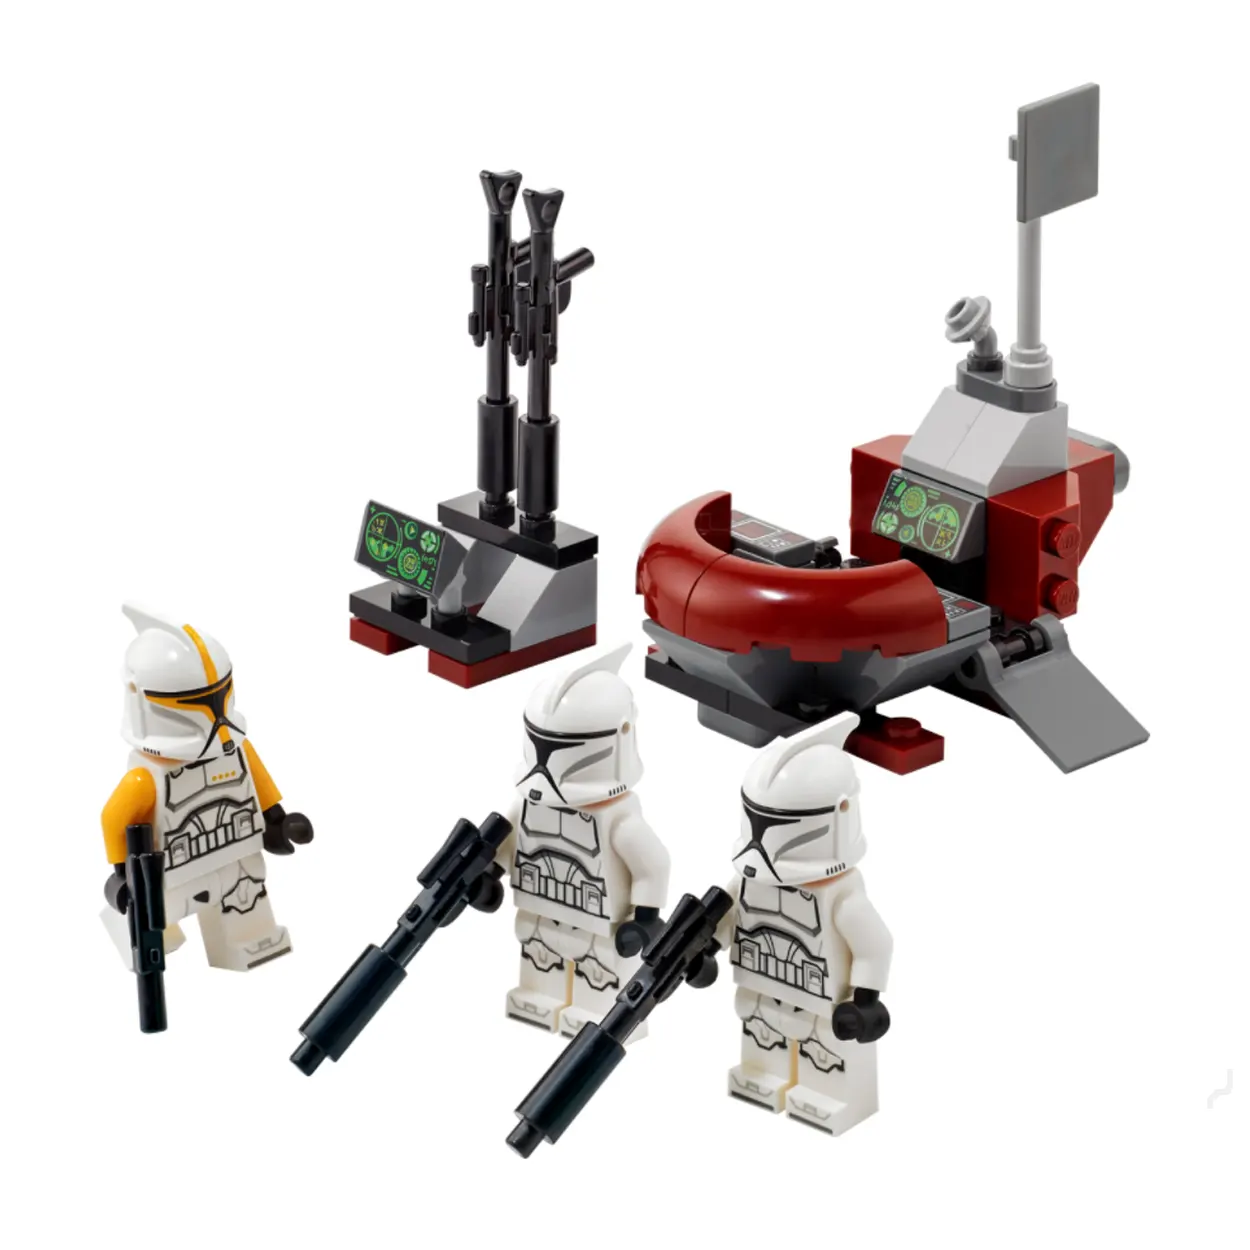 LEGO Star Wars 40557 Defence of Hoth, 40558 Clone Trooper™ Command Station New Products for Jan. 1st 2022